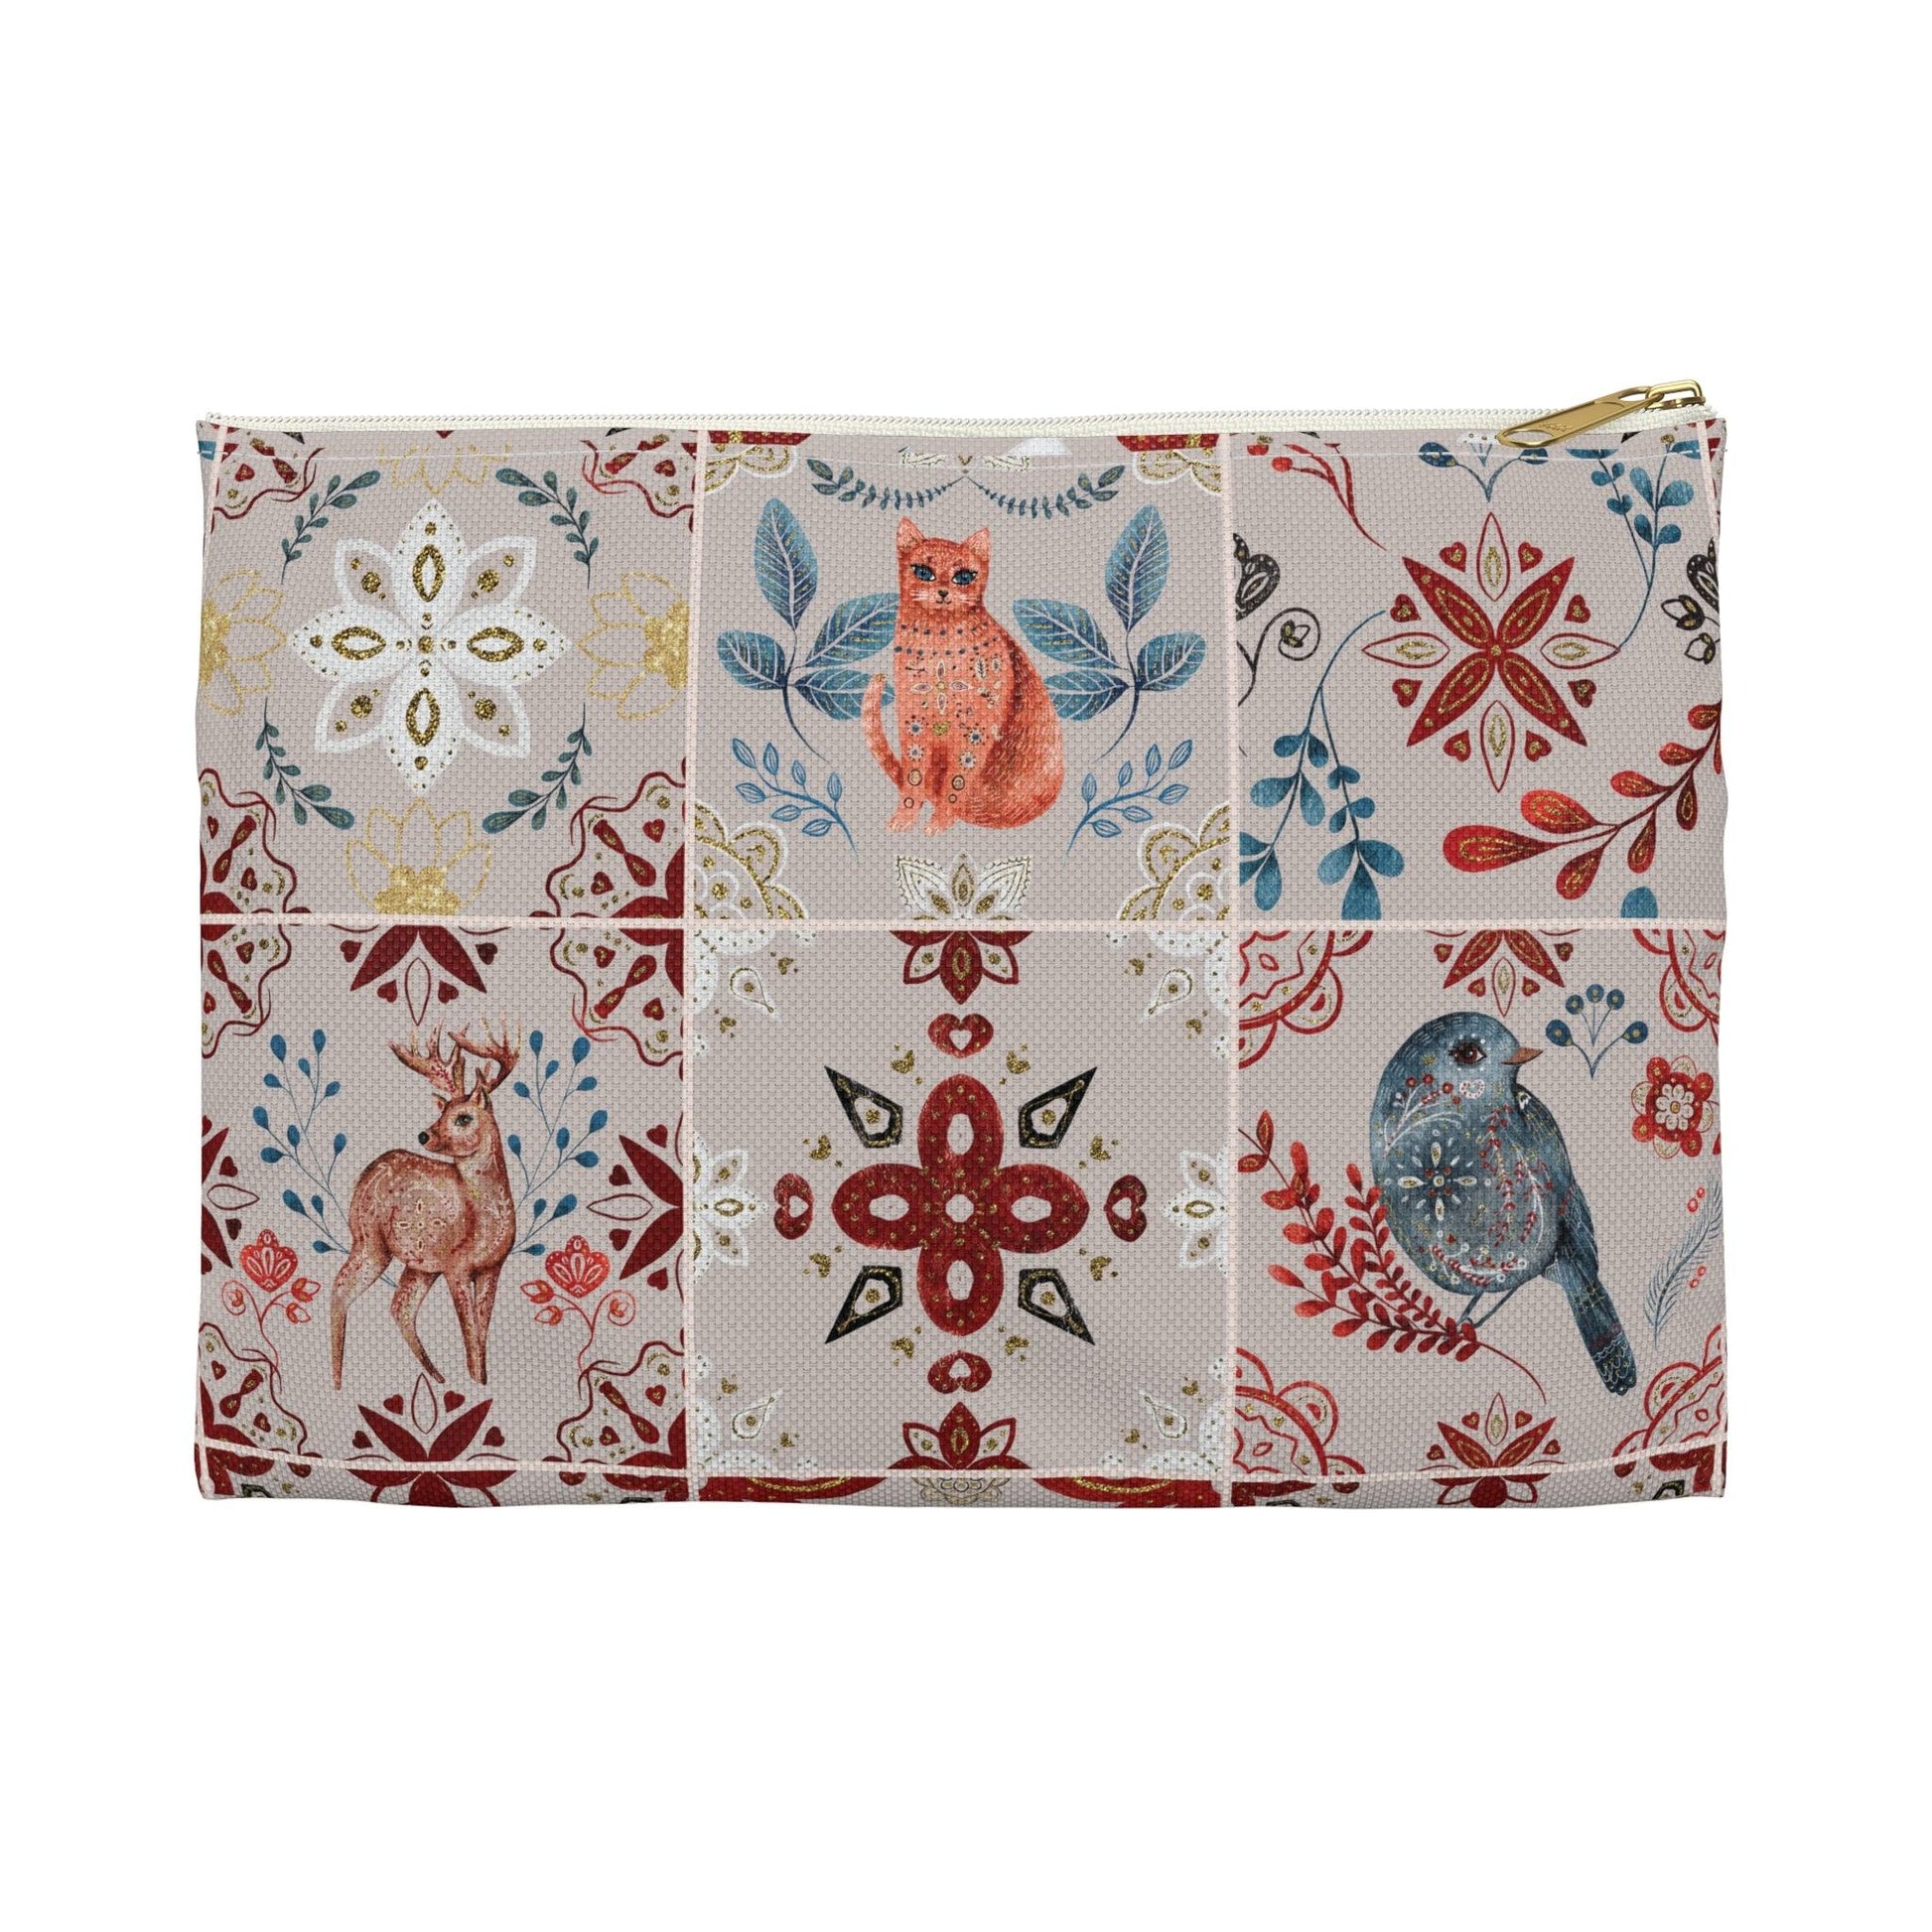 Nordic Tiles Pouch - The Global Wanderer